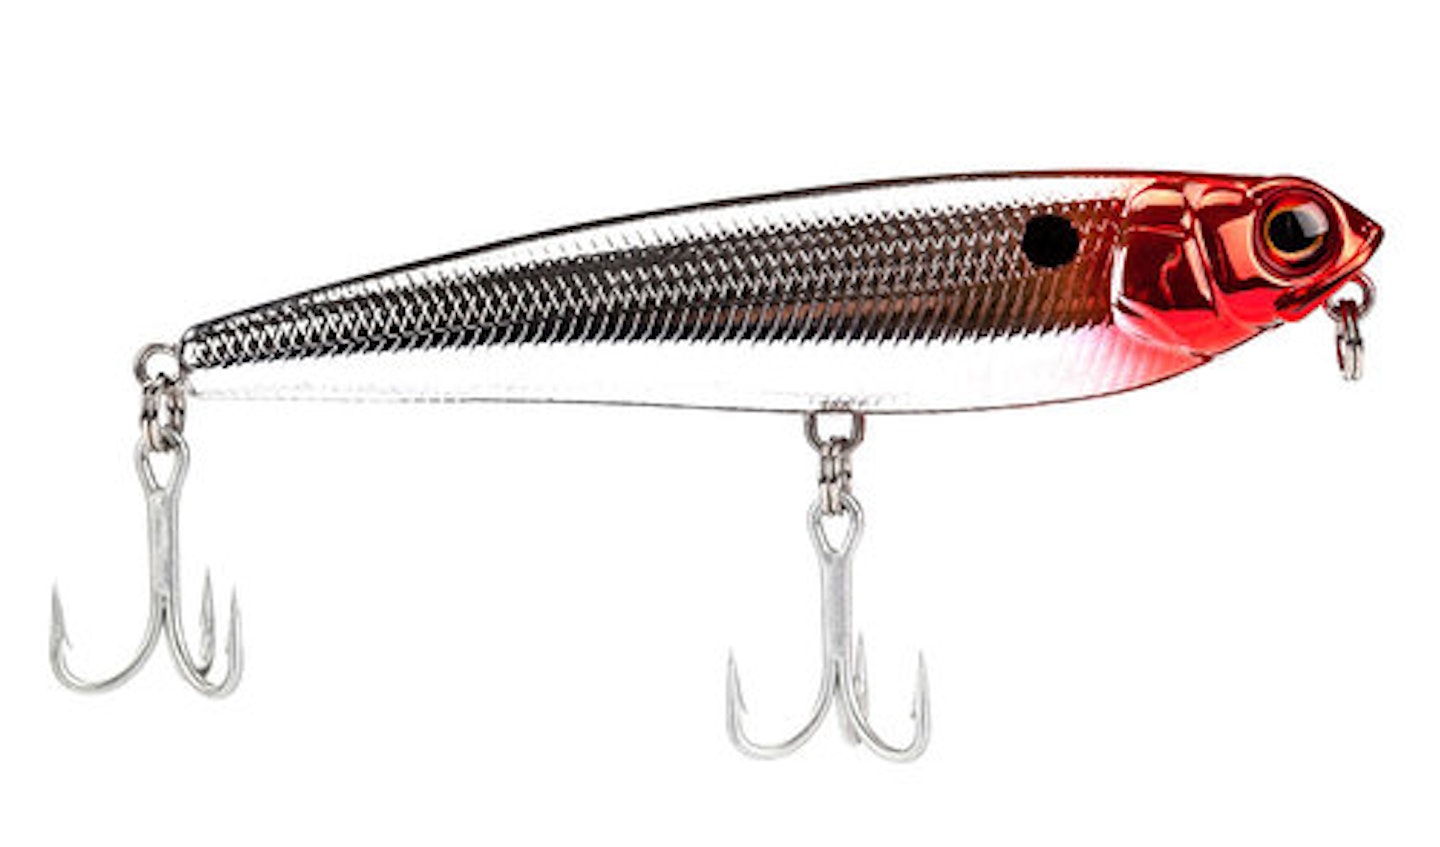 4 GREAT LURES FOR SURFACE ACTION